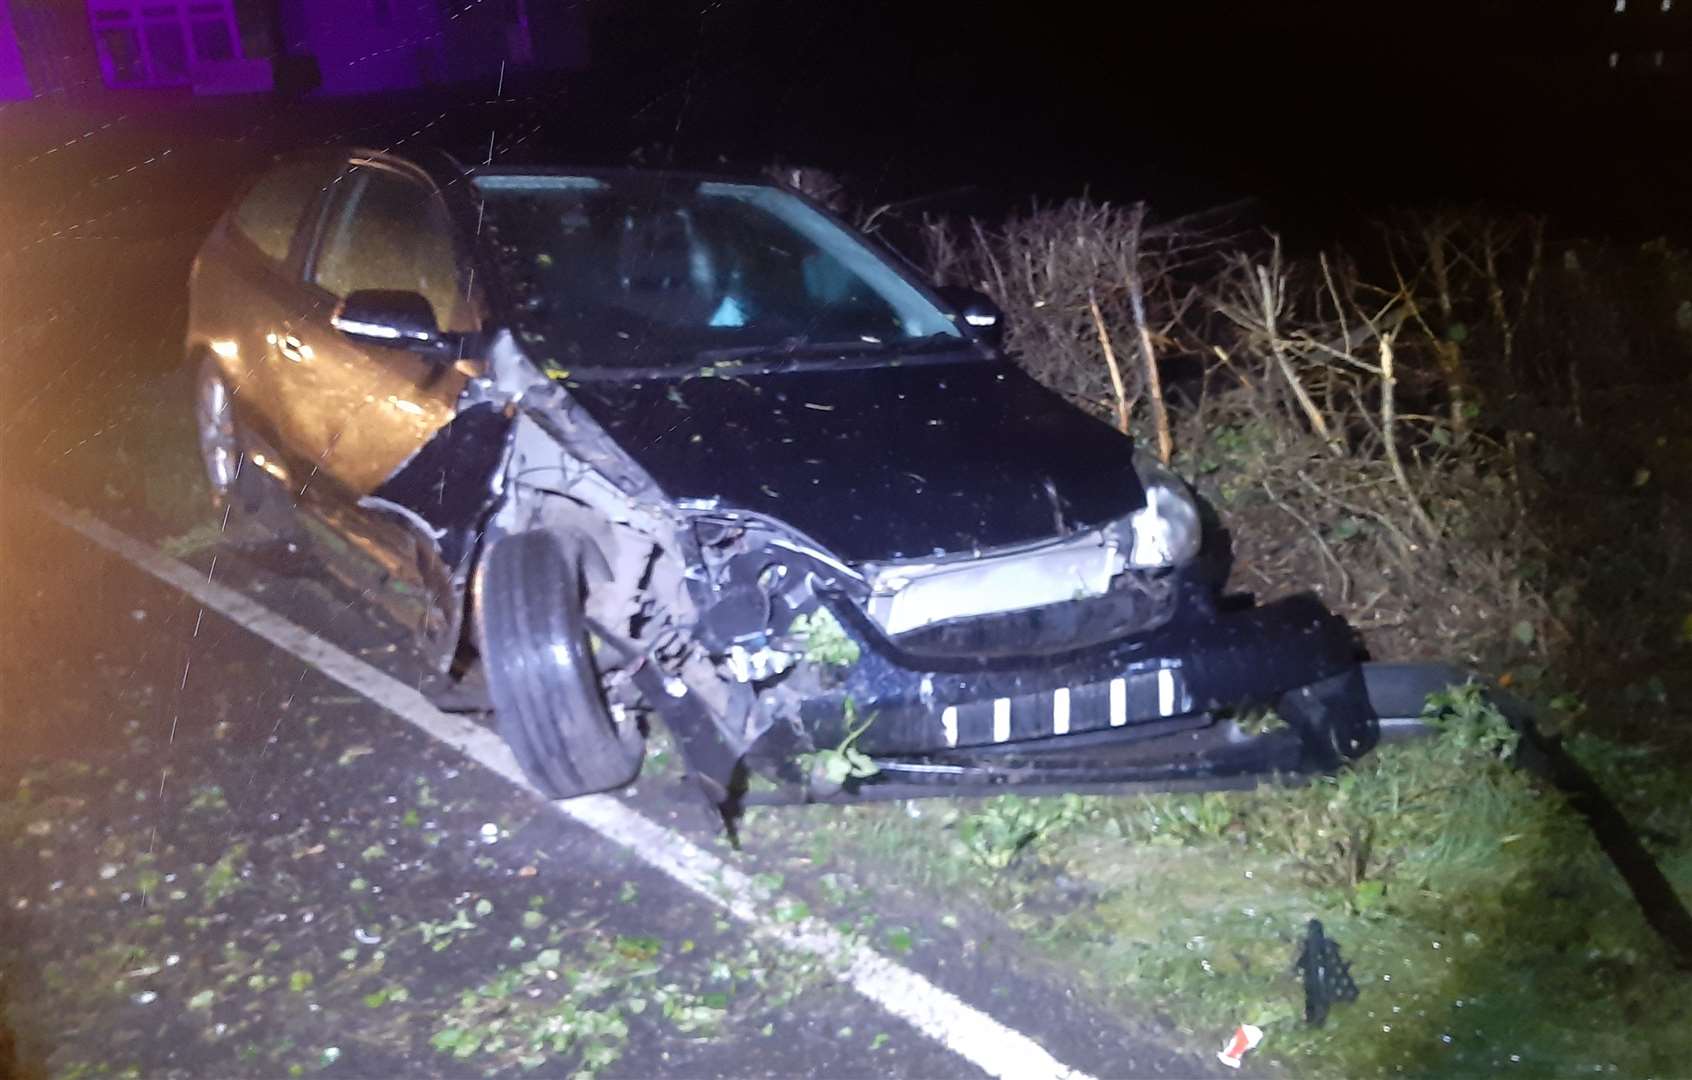 The crash happened on the A28 near Bethersden. Picture: @KentPoliceAsh